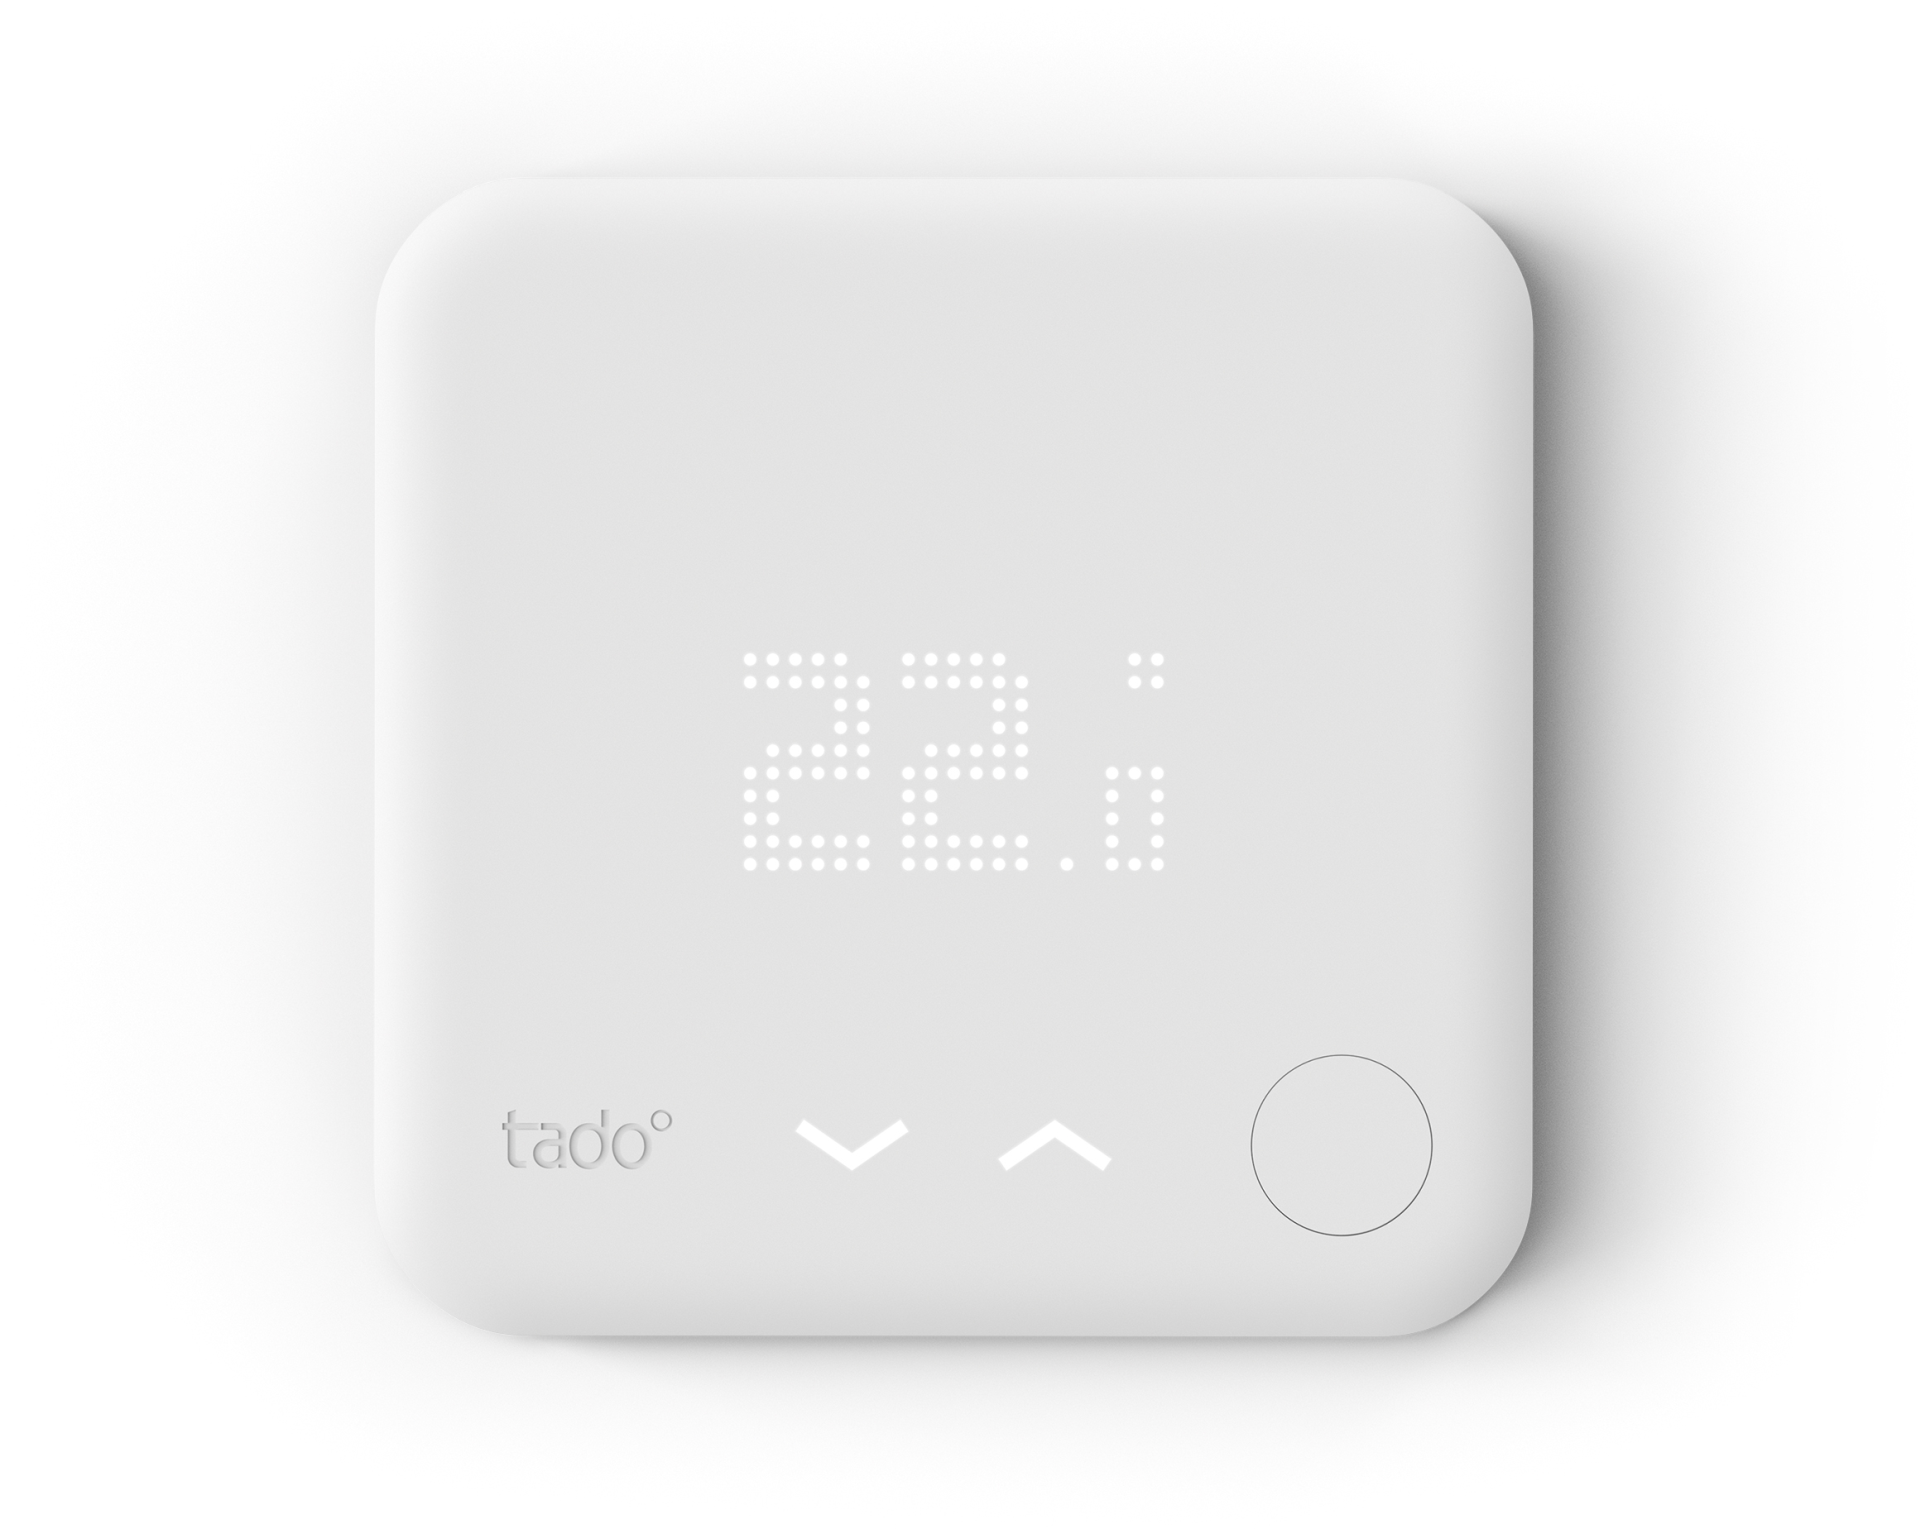 4260328610404 Tado Wired Smart Thermostat - Termostat Hus & Have,Smart Home,Termostater 2190003441 TAD-103106